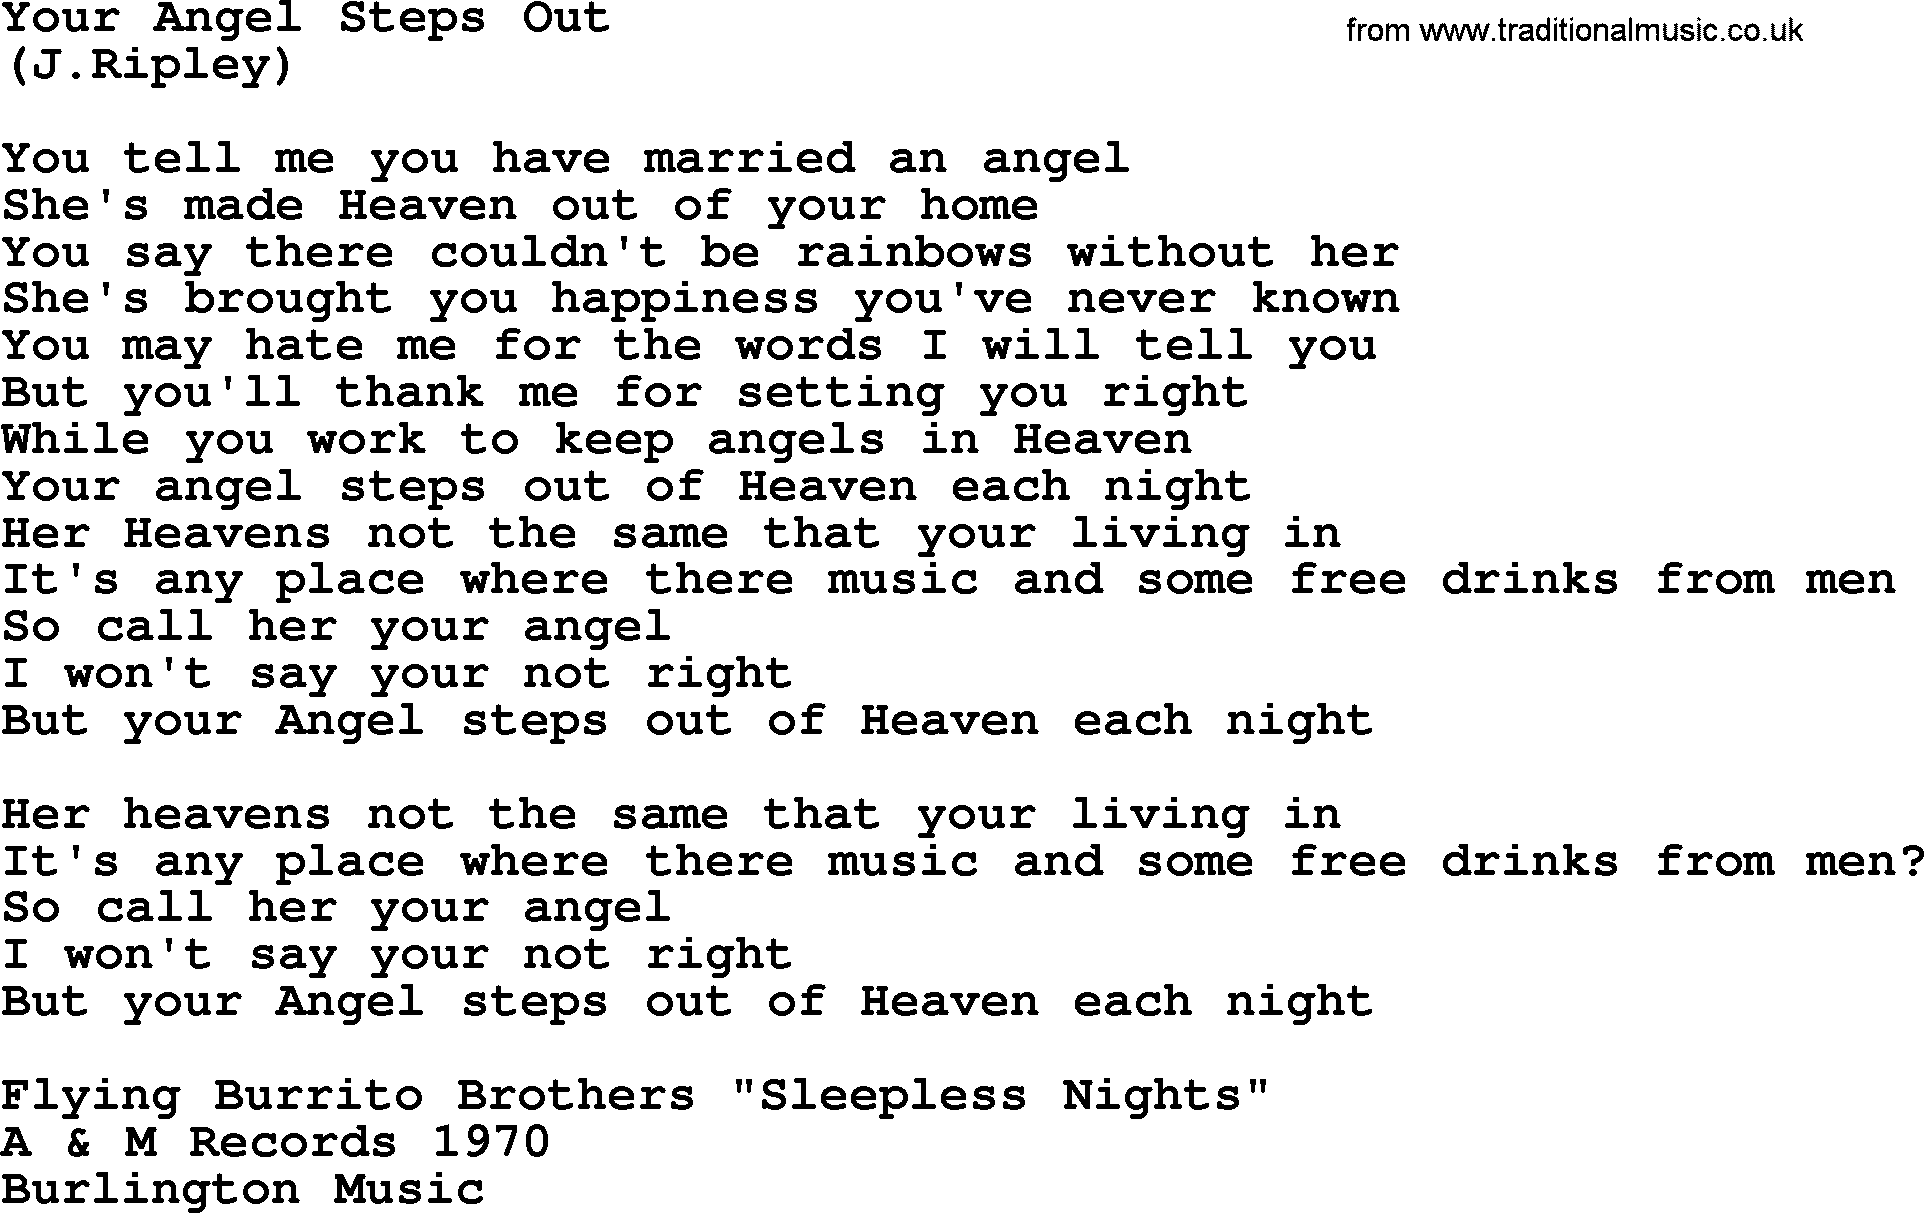 The Byrds song Your Angel Steps Out, lyrics